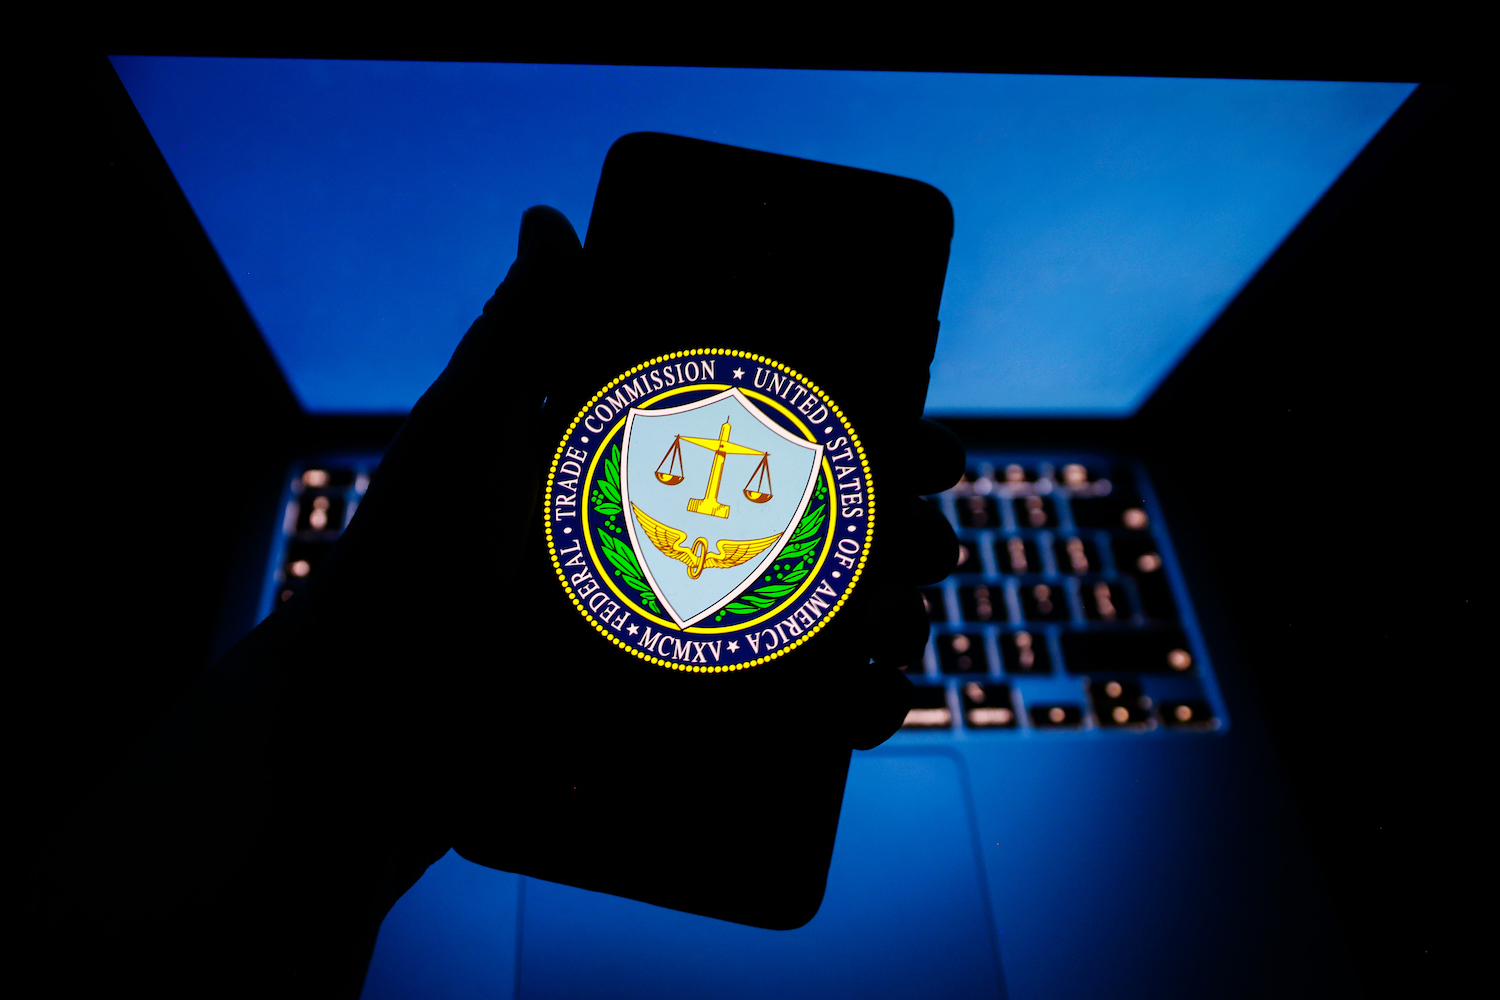 The Federal Trade Commission of the United States seal is displayed on a mobile phone screen for illustration photo. Krakow, Poland on February 2nd, 2023. (Photo by Beata Zawrzel/NurPhoto)